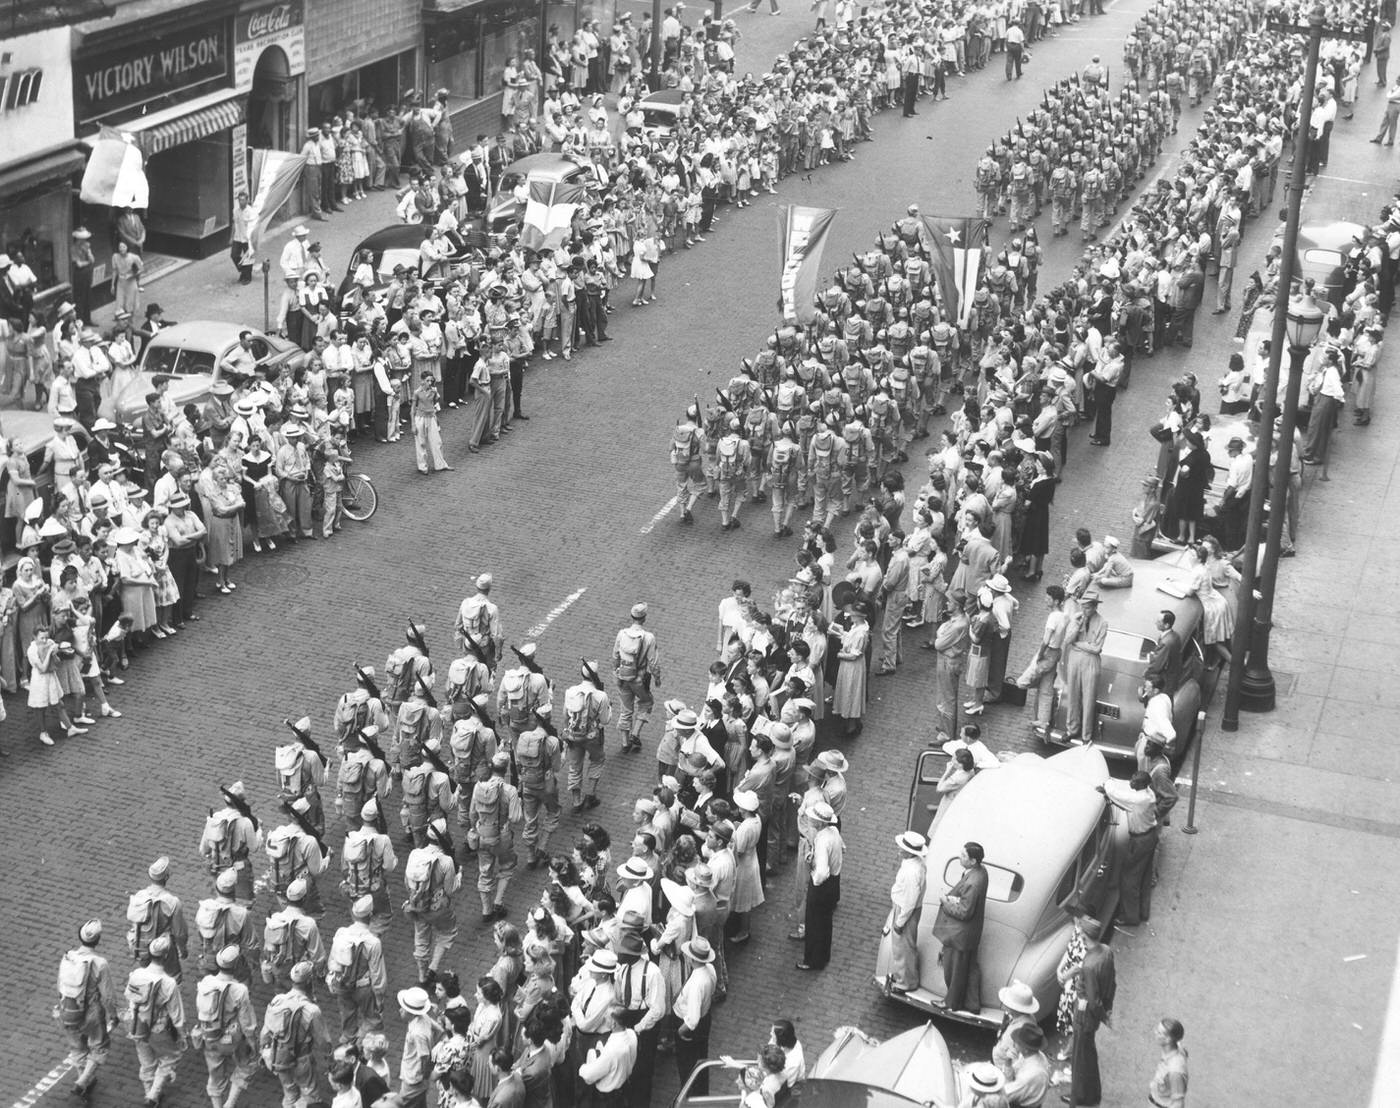 156th Infantry from Camp Bowie, Texas, marching on Fort Worth's Main St., 1940